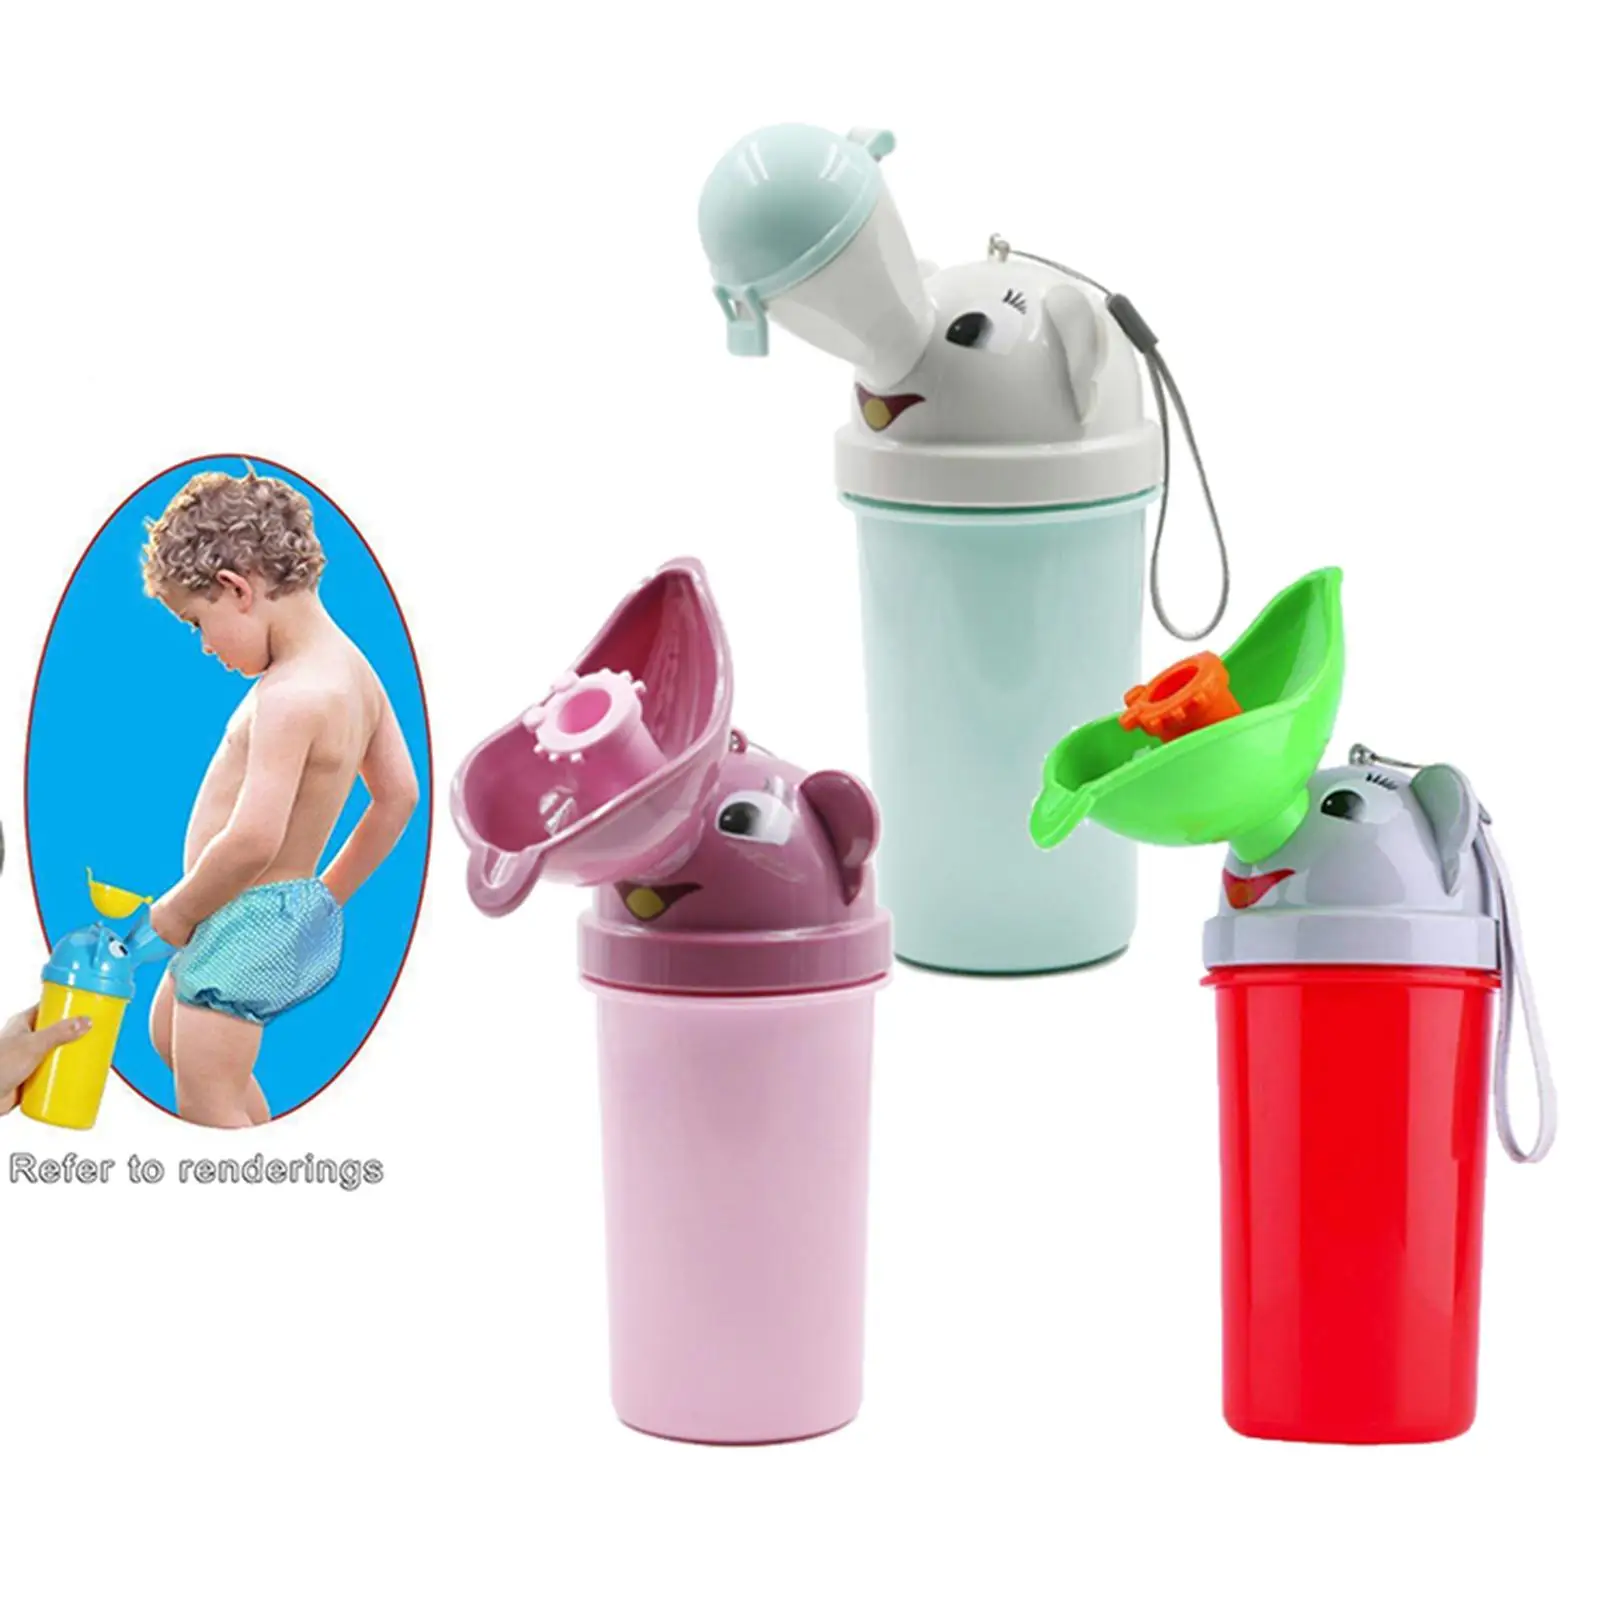 Kids Travel Urinal Potty Toilet Pee Bottle Cup for Airplane Camping Park